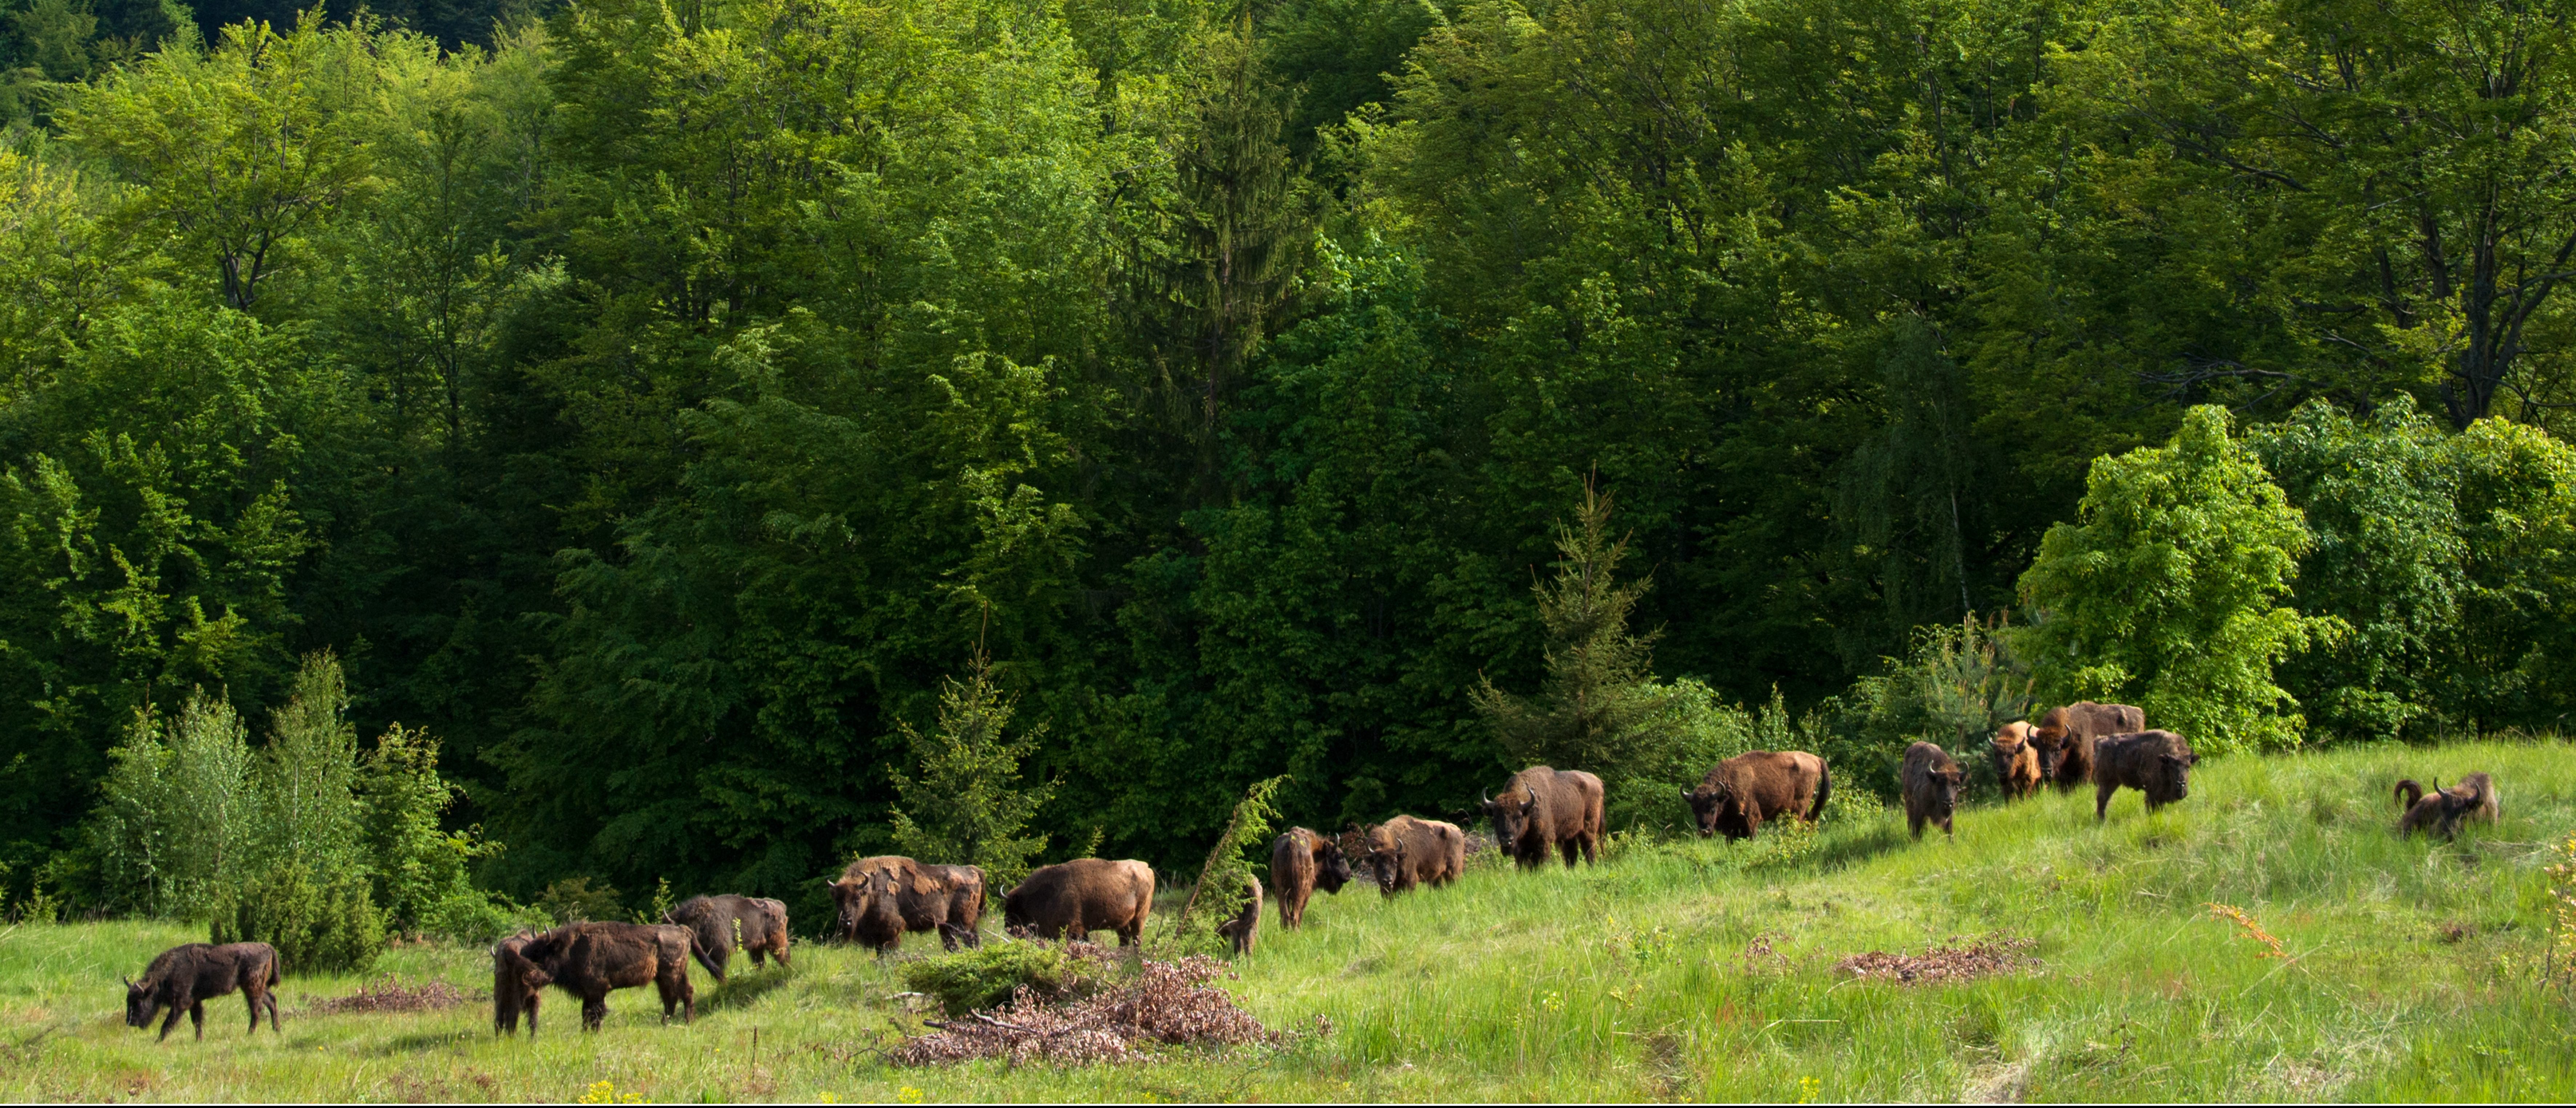 In late August nine European bison were released into the wild in the Țarcu Mountains, at the second of the Southern Carpathian rewilding areas.